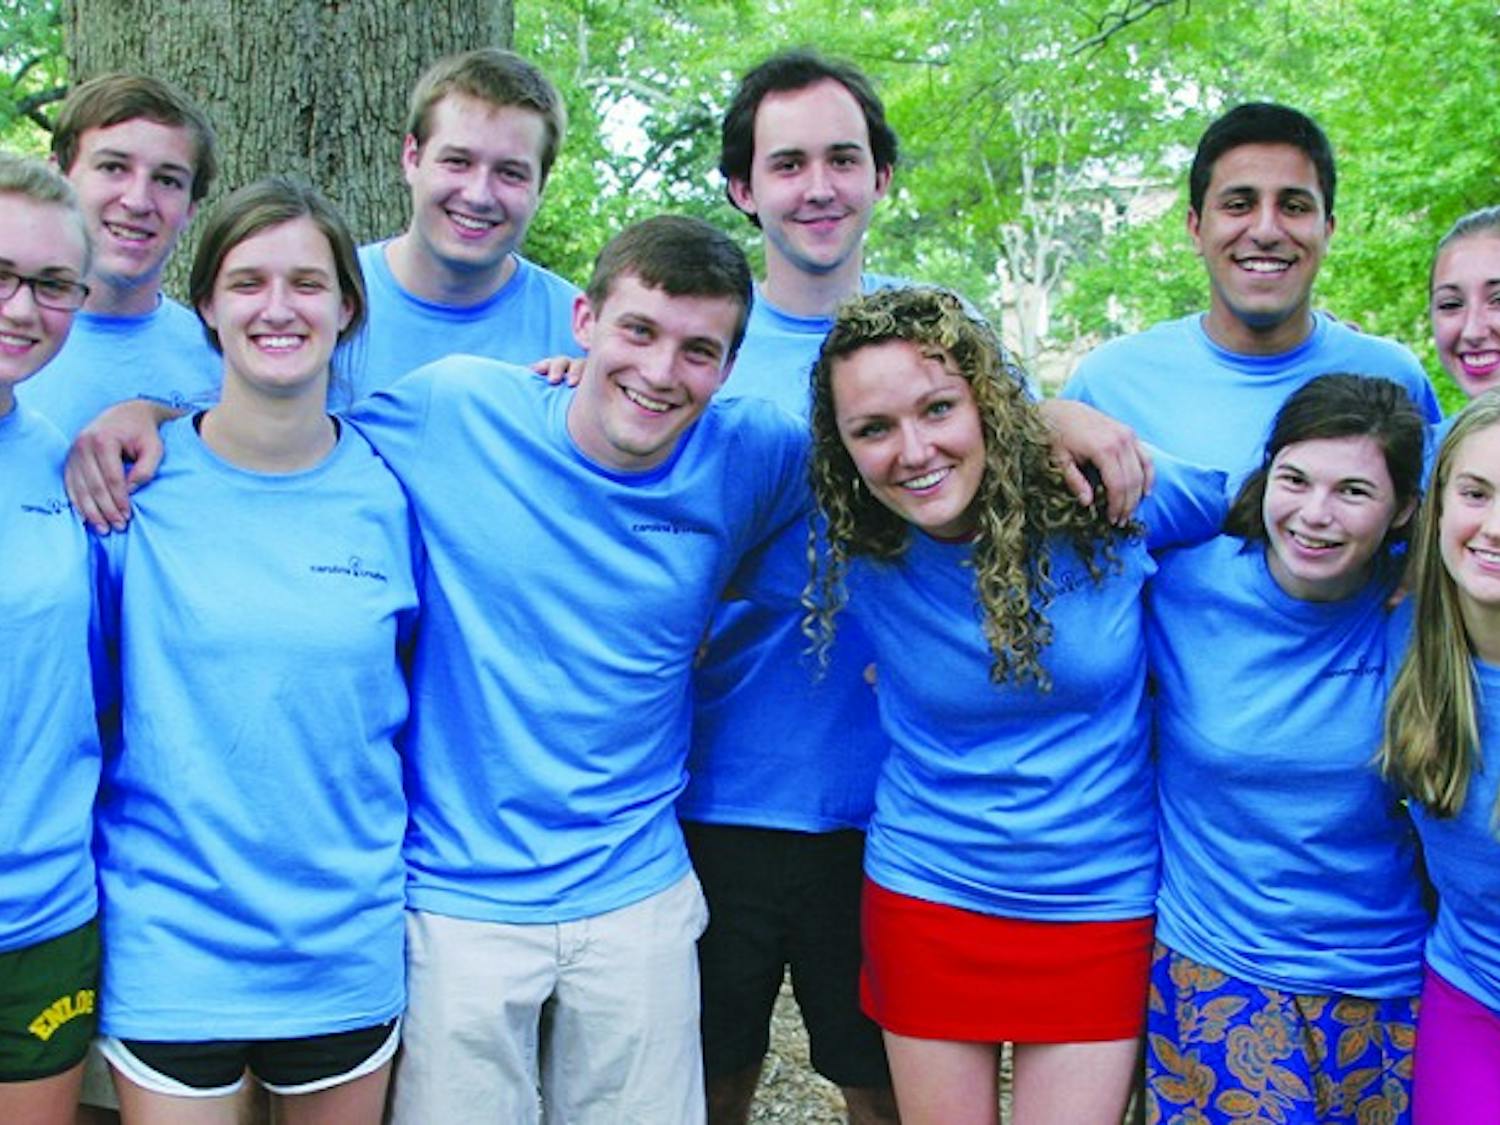 Carolina Creates staff: Hudson Vincent (President), Adam Jutha (Director of Communication), Alex Almeter (Director of Finance), Rebecca Egger (Director of Marketing and Design), Courtney Sandford (Director of Outreach and Development); Carolina Creates Global Directors-Rachel Myrick and Mackenzie Thomas; Online Directors-Daniel Rue and Kevin Kimball; Visual Arts Directors-Manchen Hao (not pictured) and Margrethe Williams; Writers Director-Alex Karsten; (not pictured) Music Directors-David August and Patrick Carney